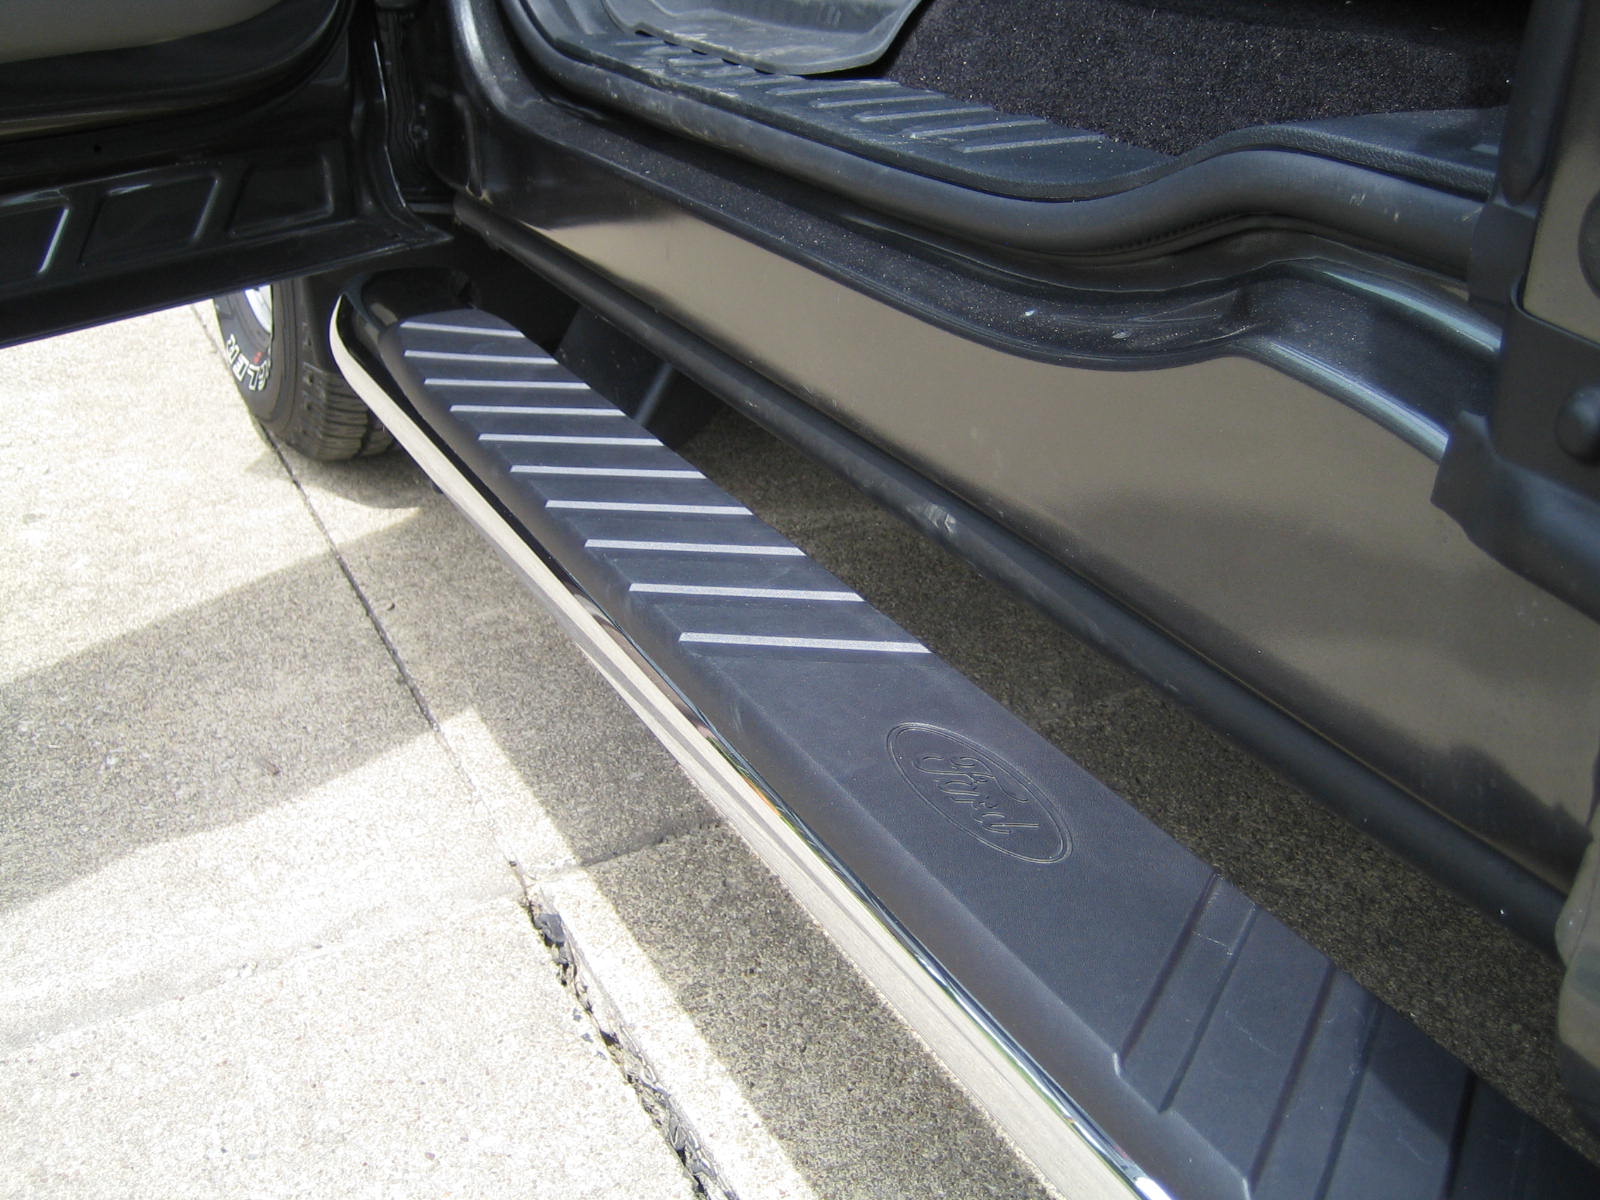 Oem running boards for ford f150 #4